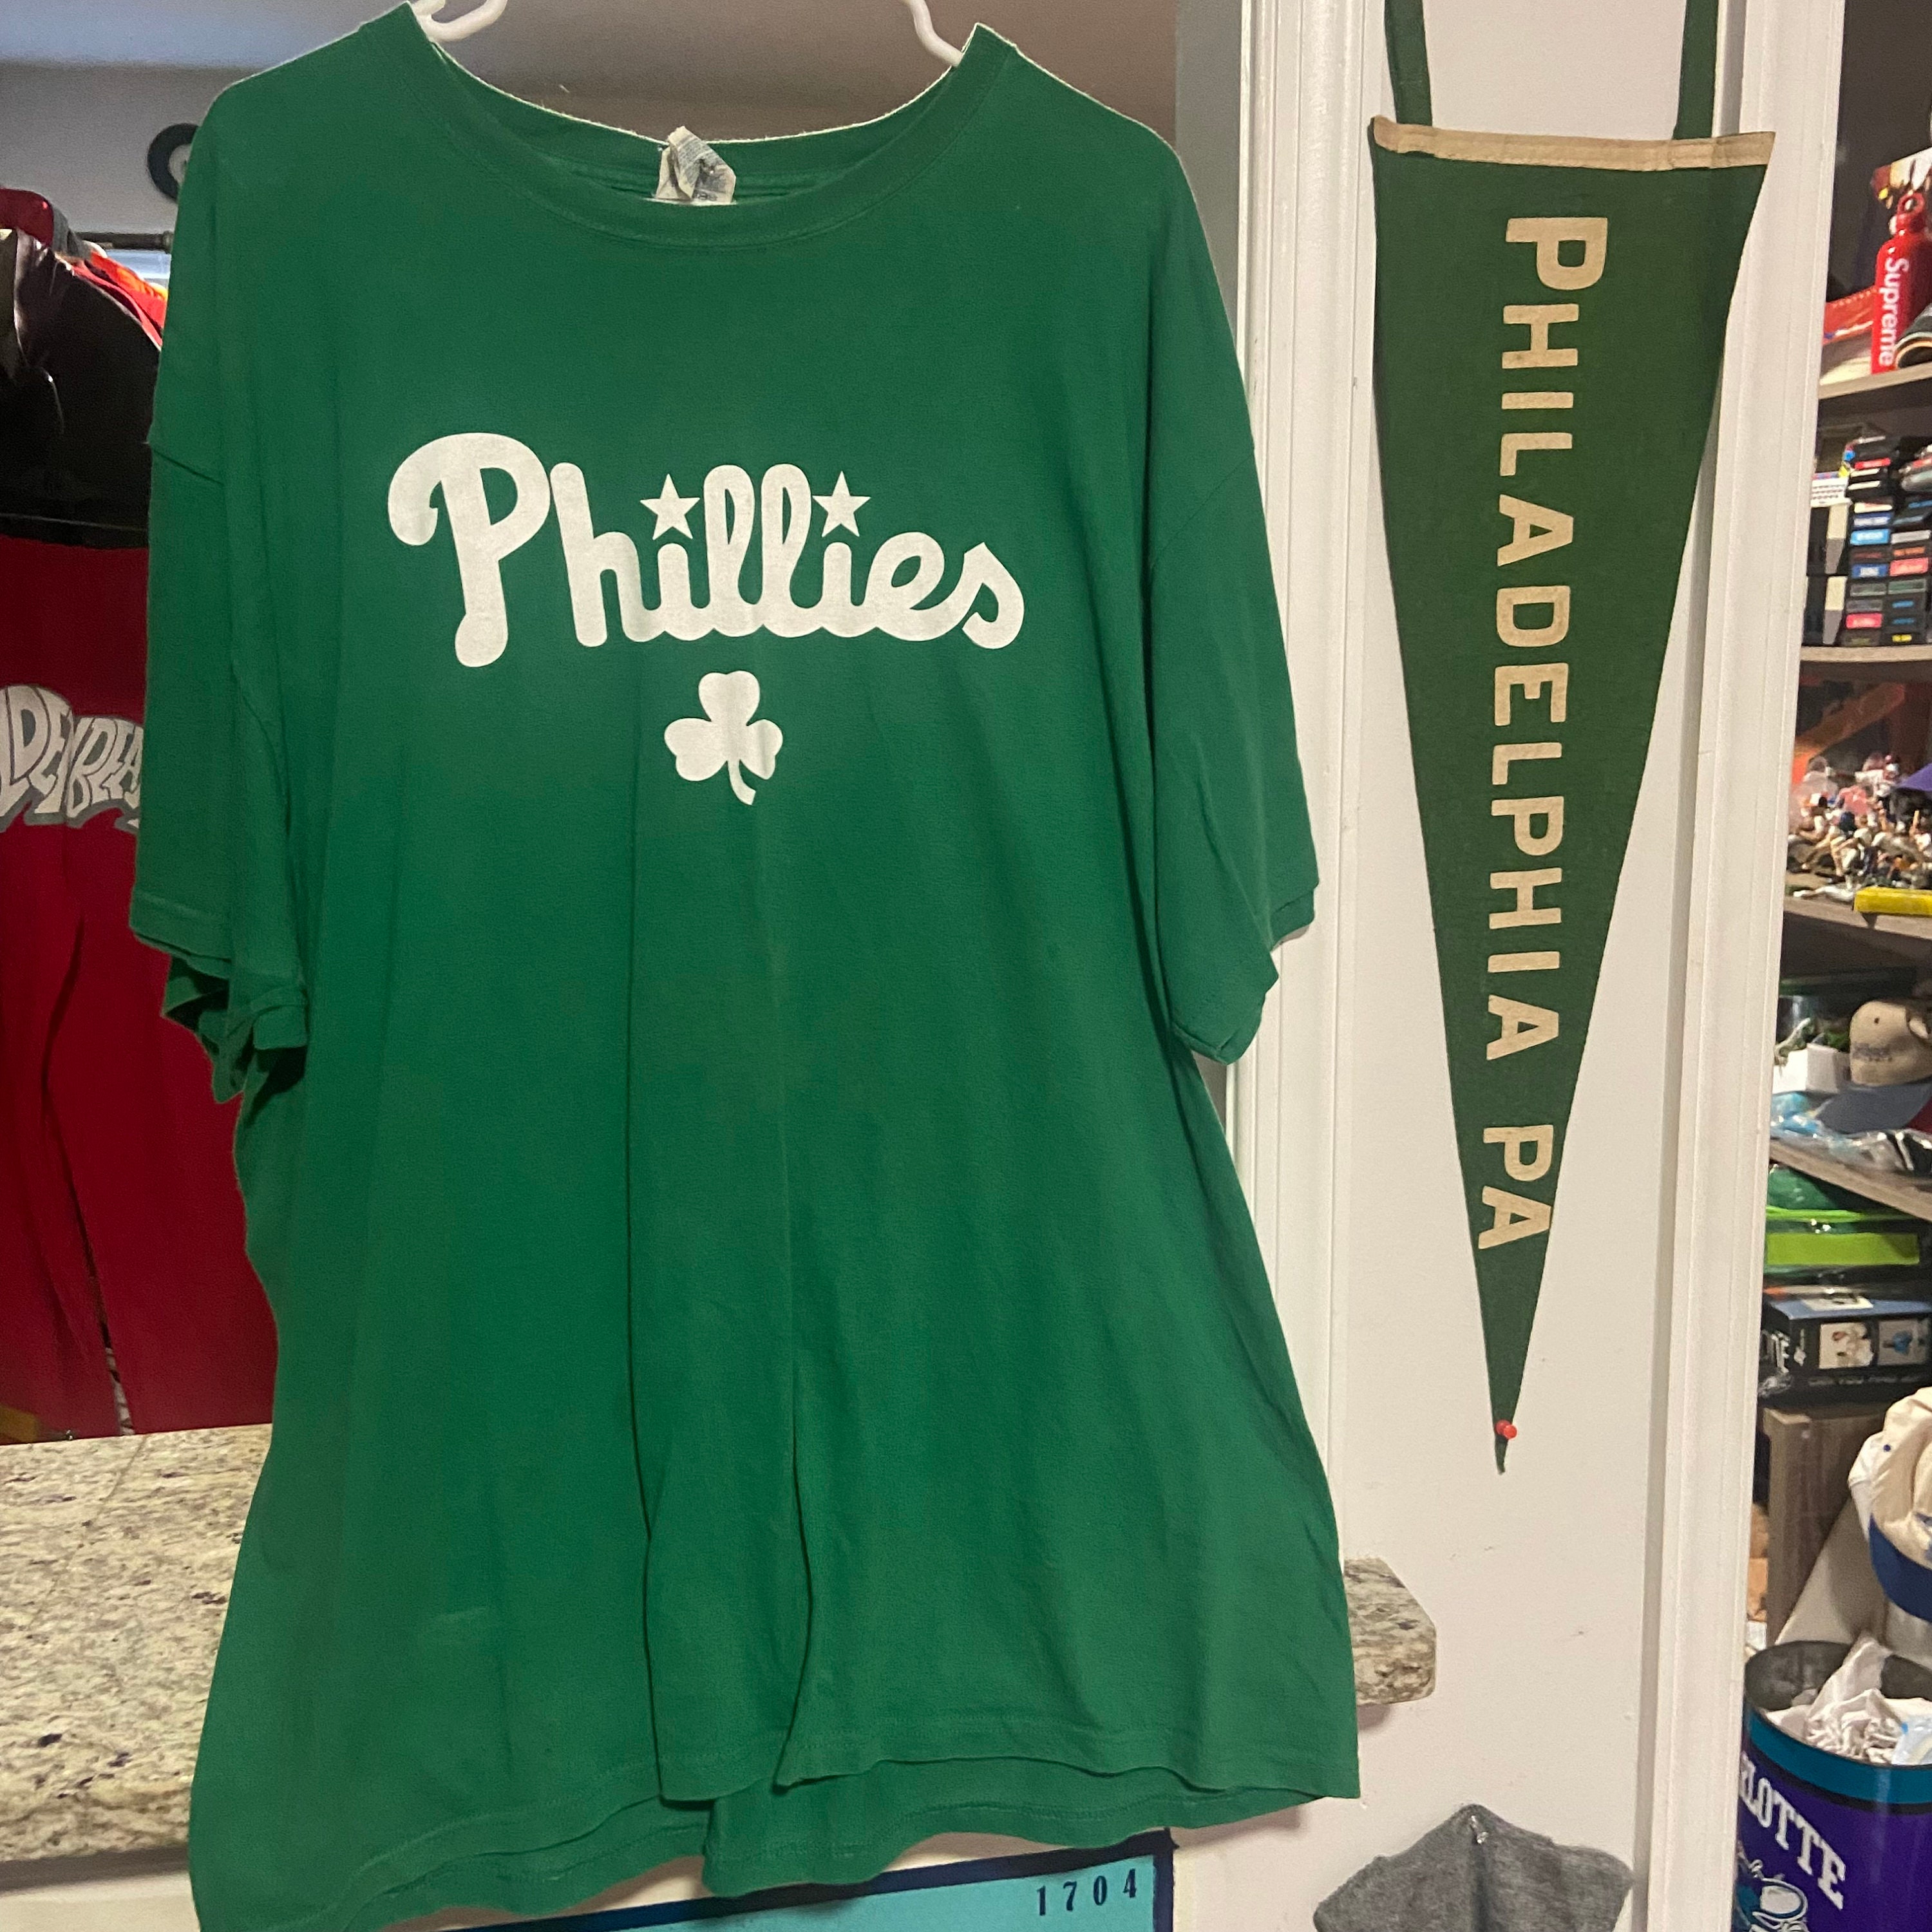 MLB Philadelphia Phillies Mike Schmidt Mitchell and Ness St. Pats